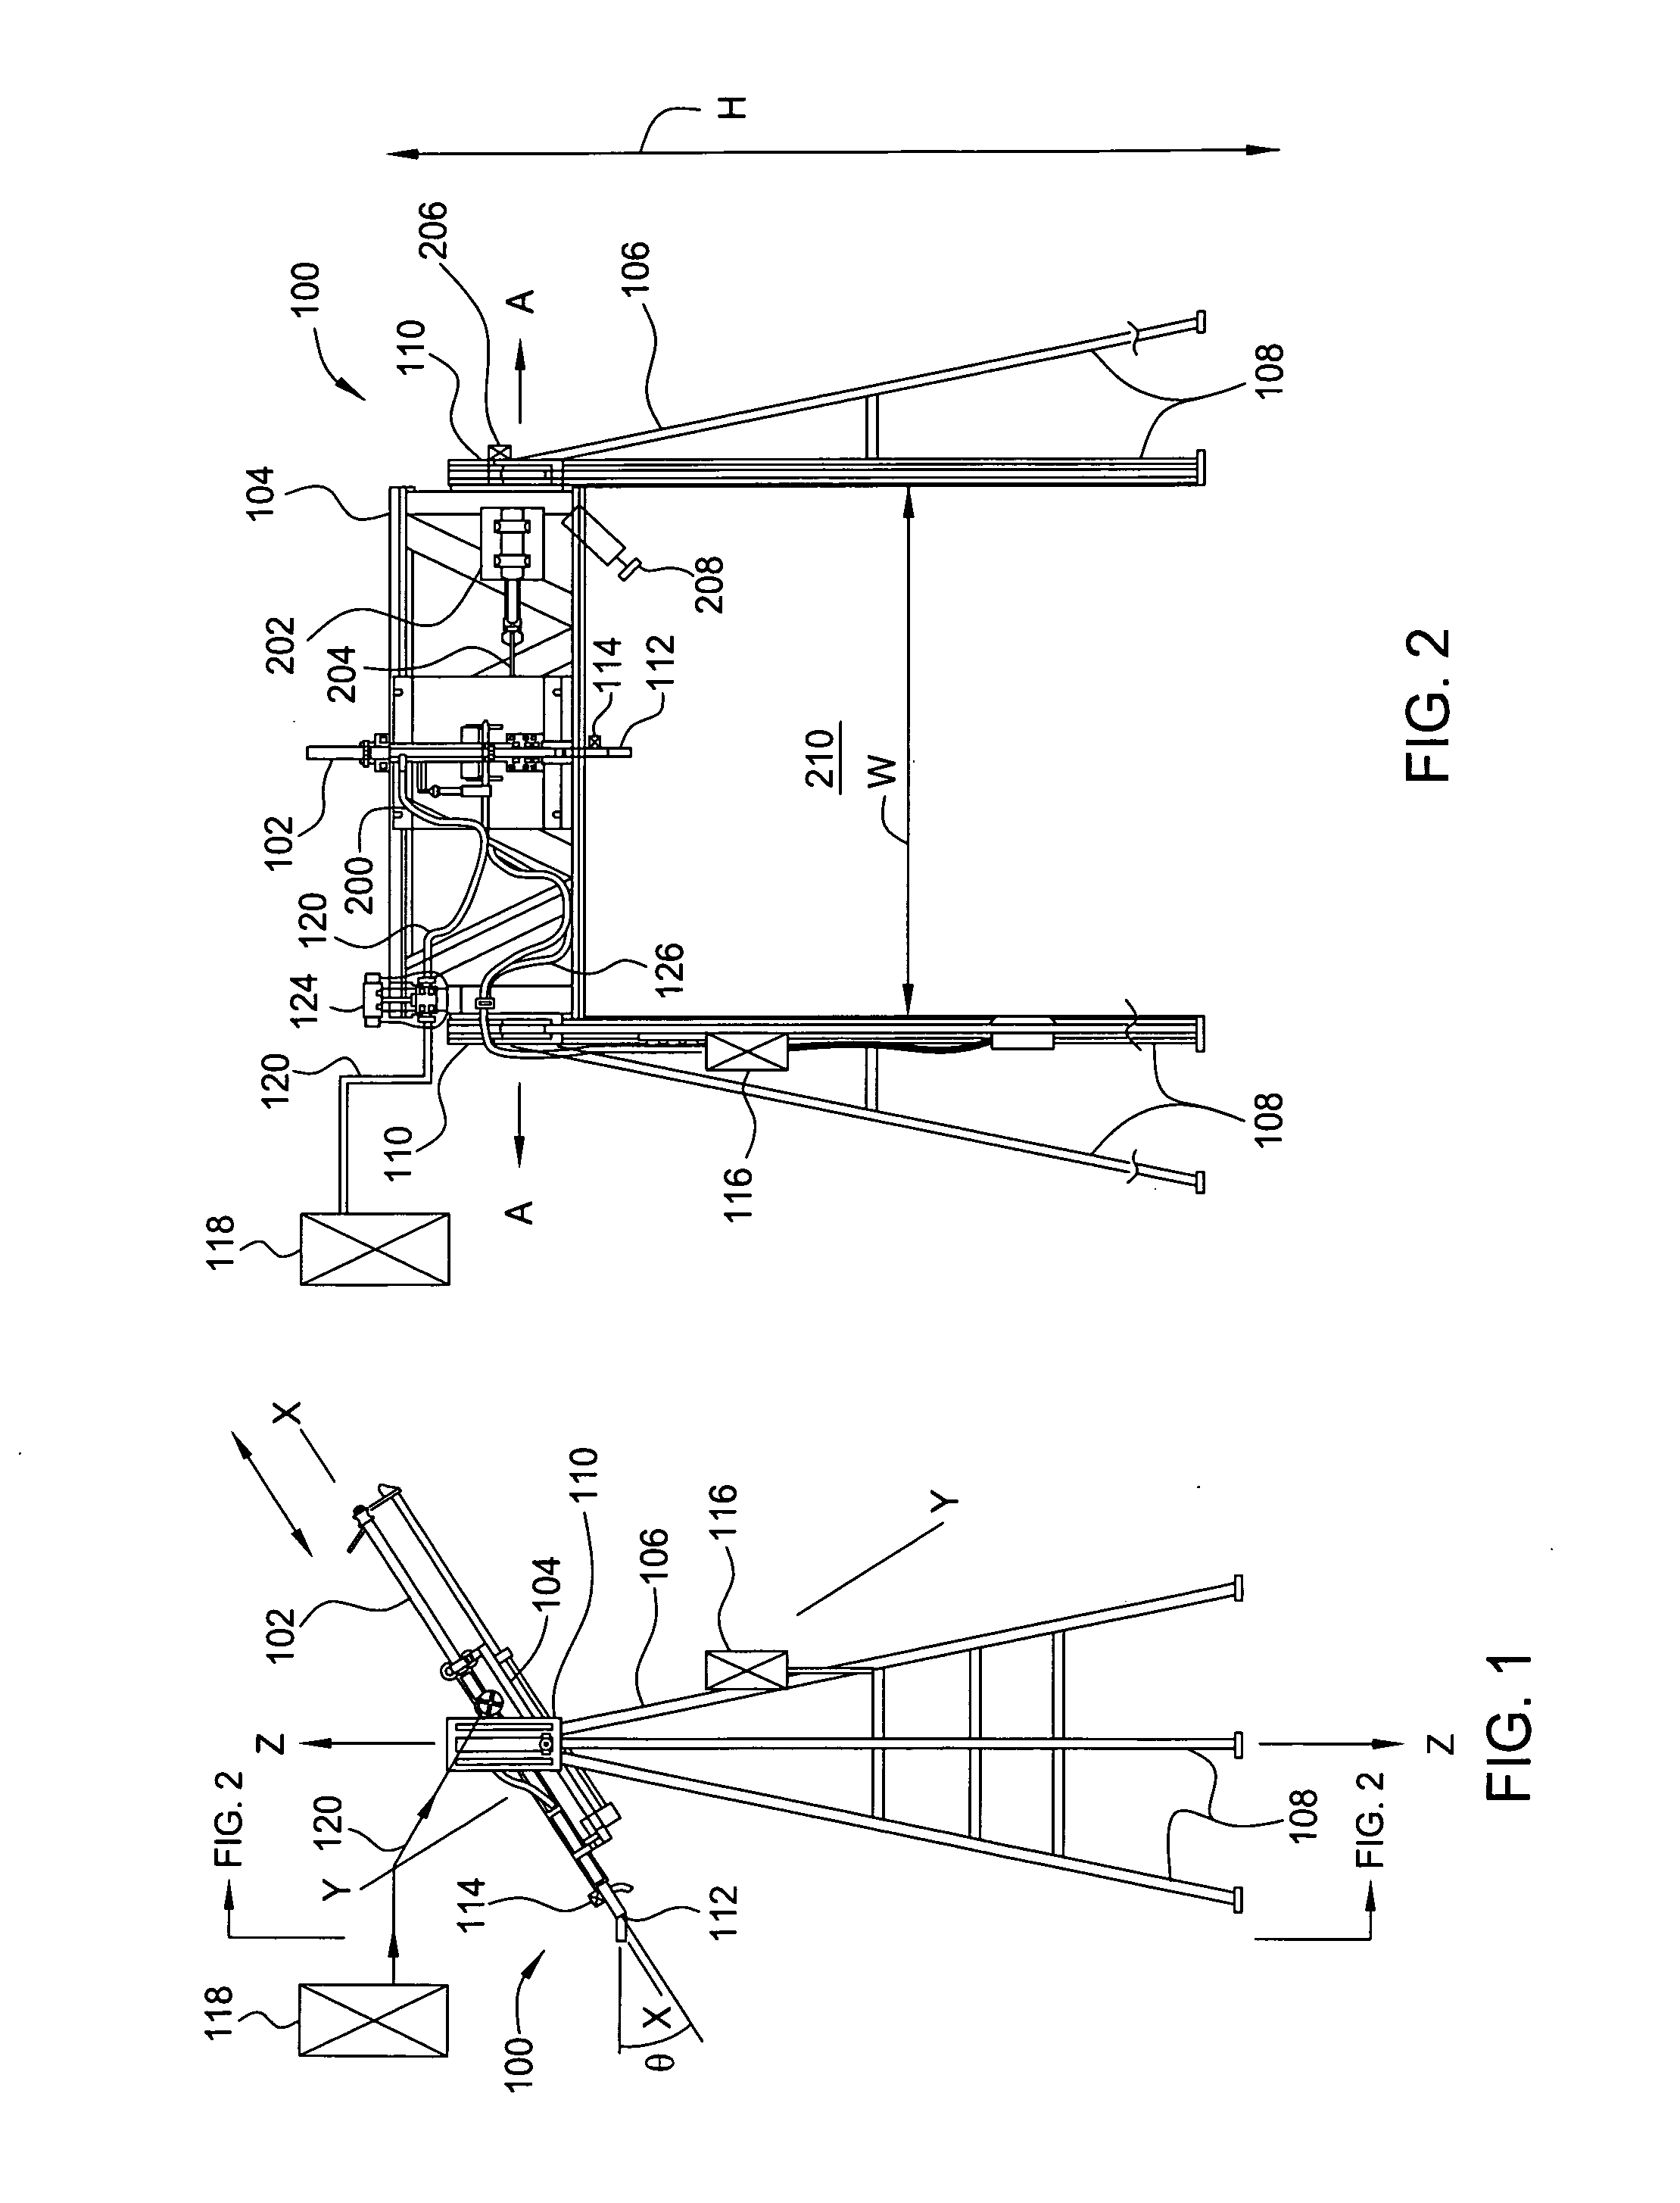 Concrete cooling injection unit and method of injecting a coolant into a concrete mixture